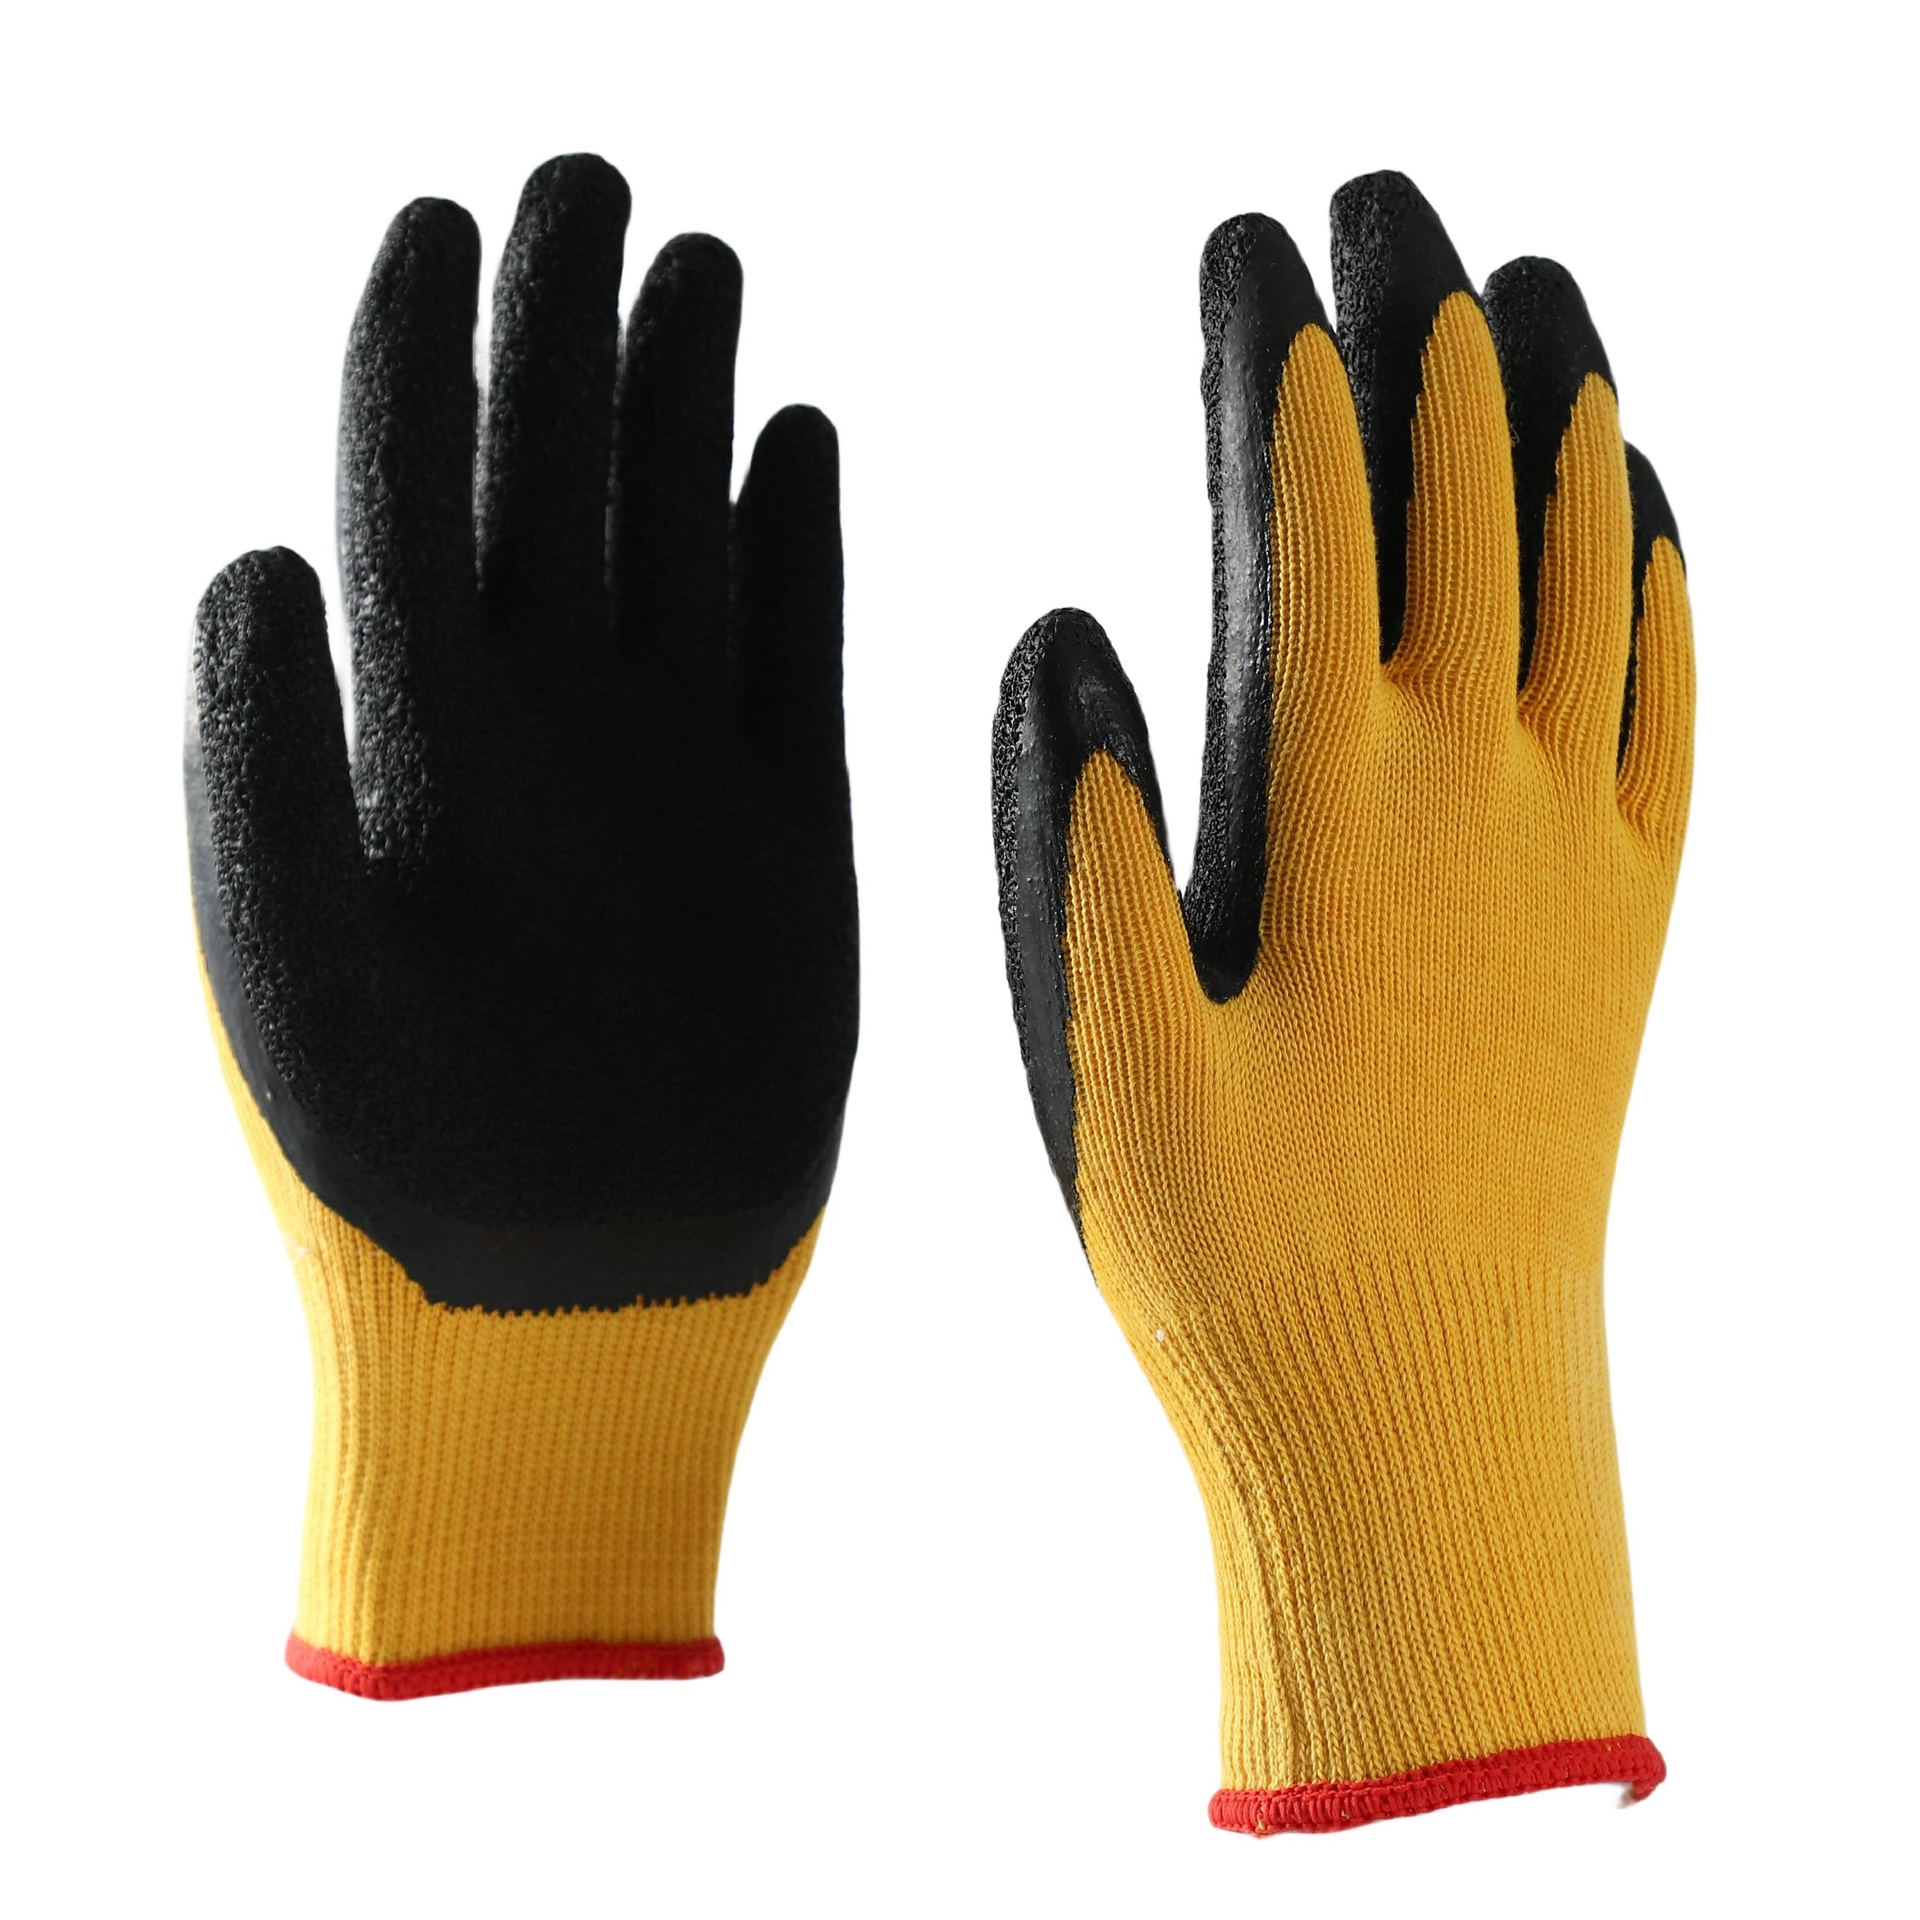                 Yellow cotton  with black latex crinkle coating gloves            